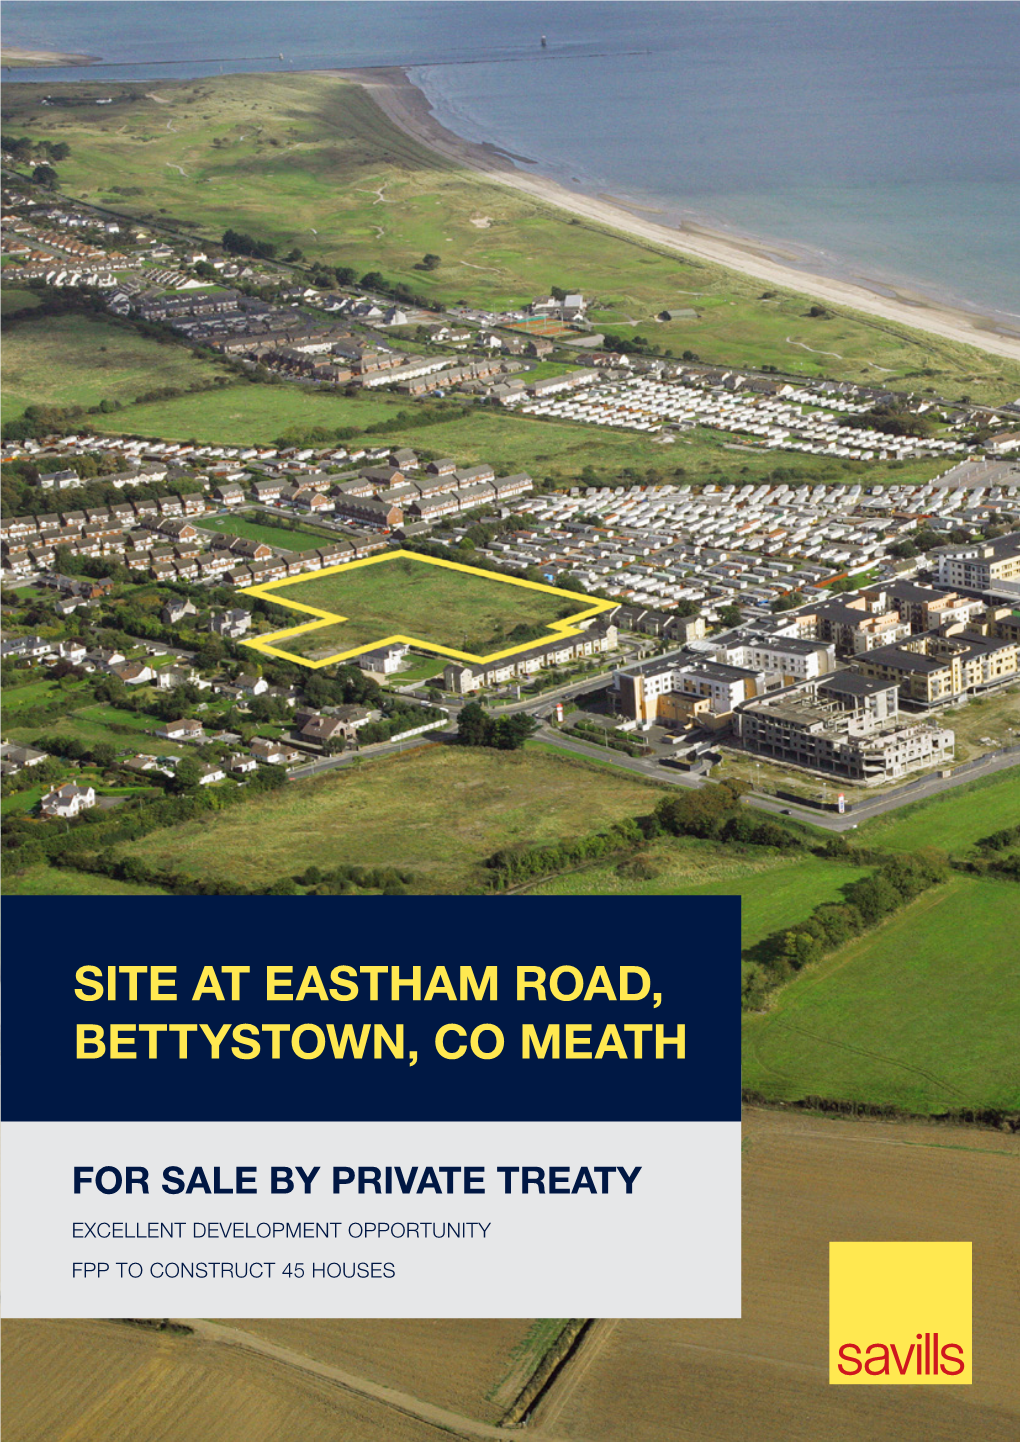 Site at Eastham Road, Bettystown, Co Meath